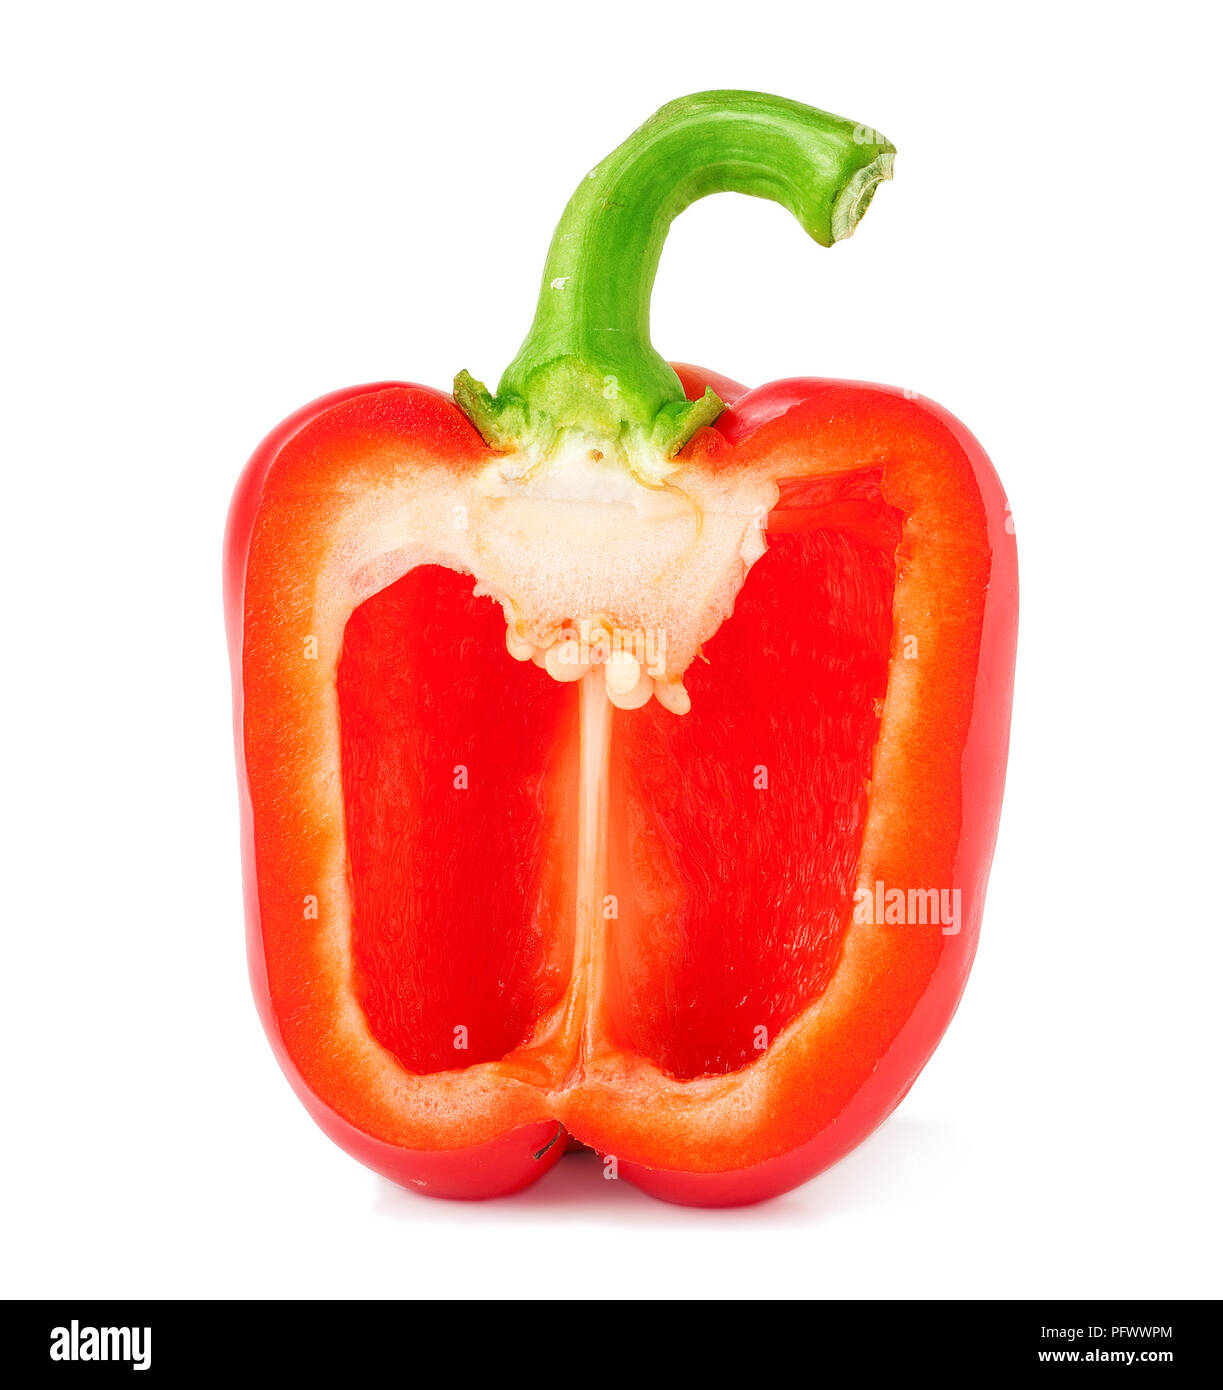 half red bell pepper on a white background Stock Photo - Alamy